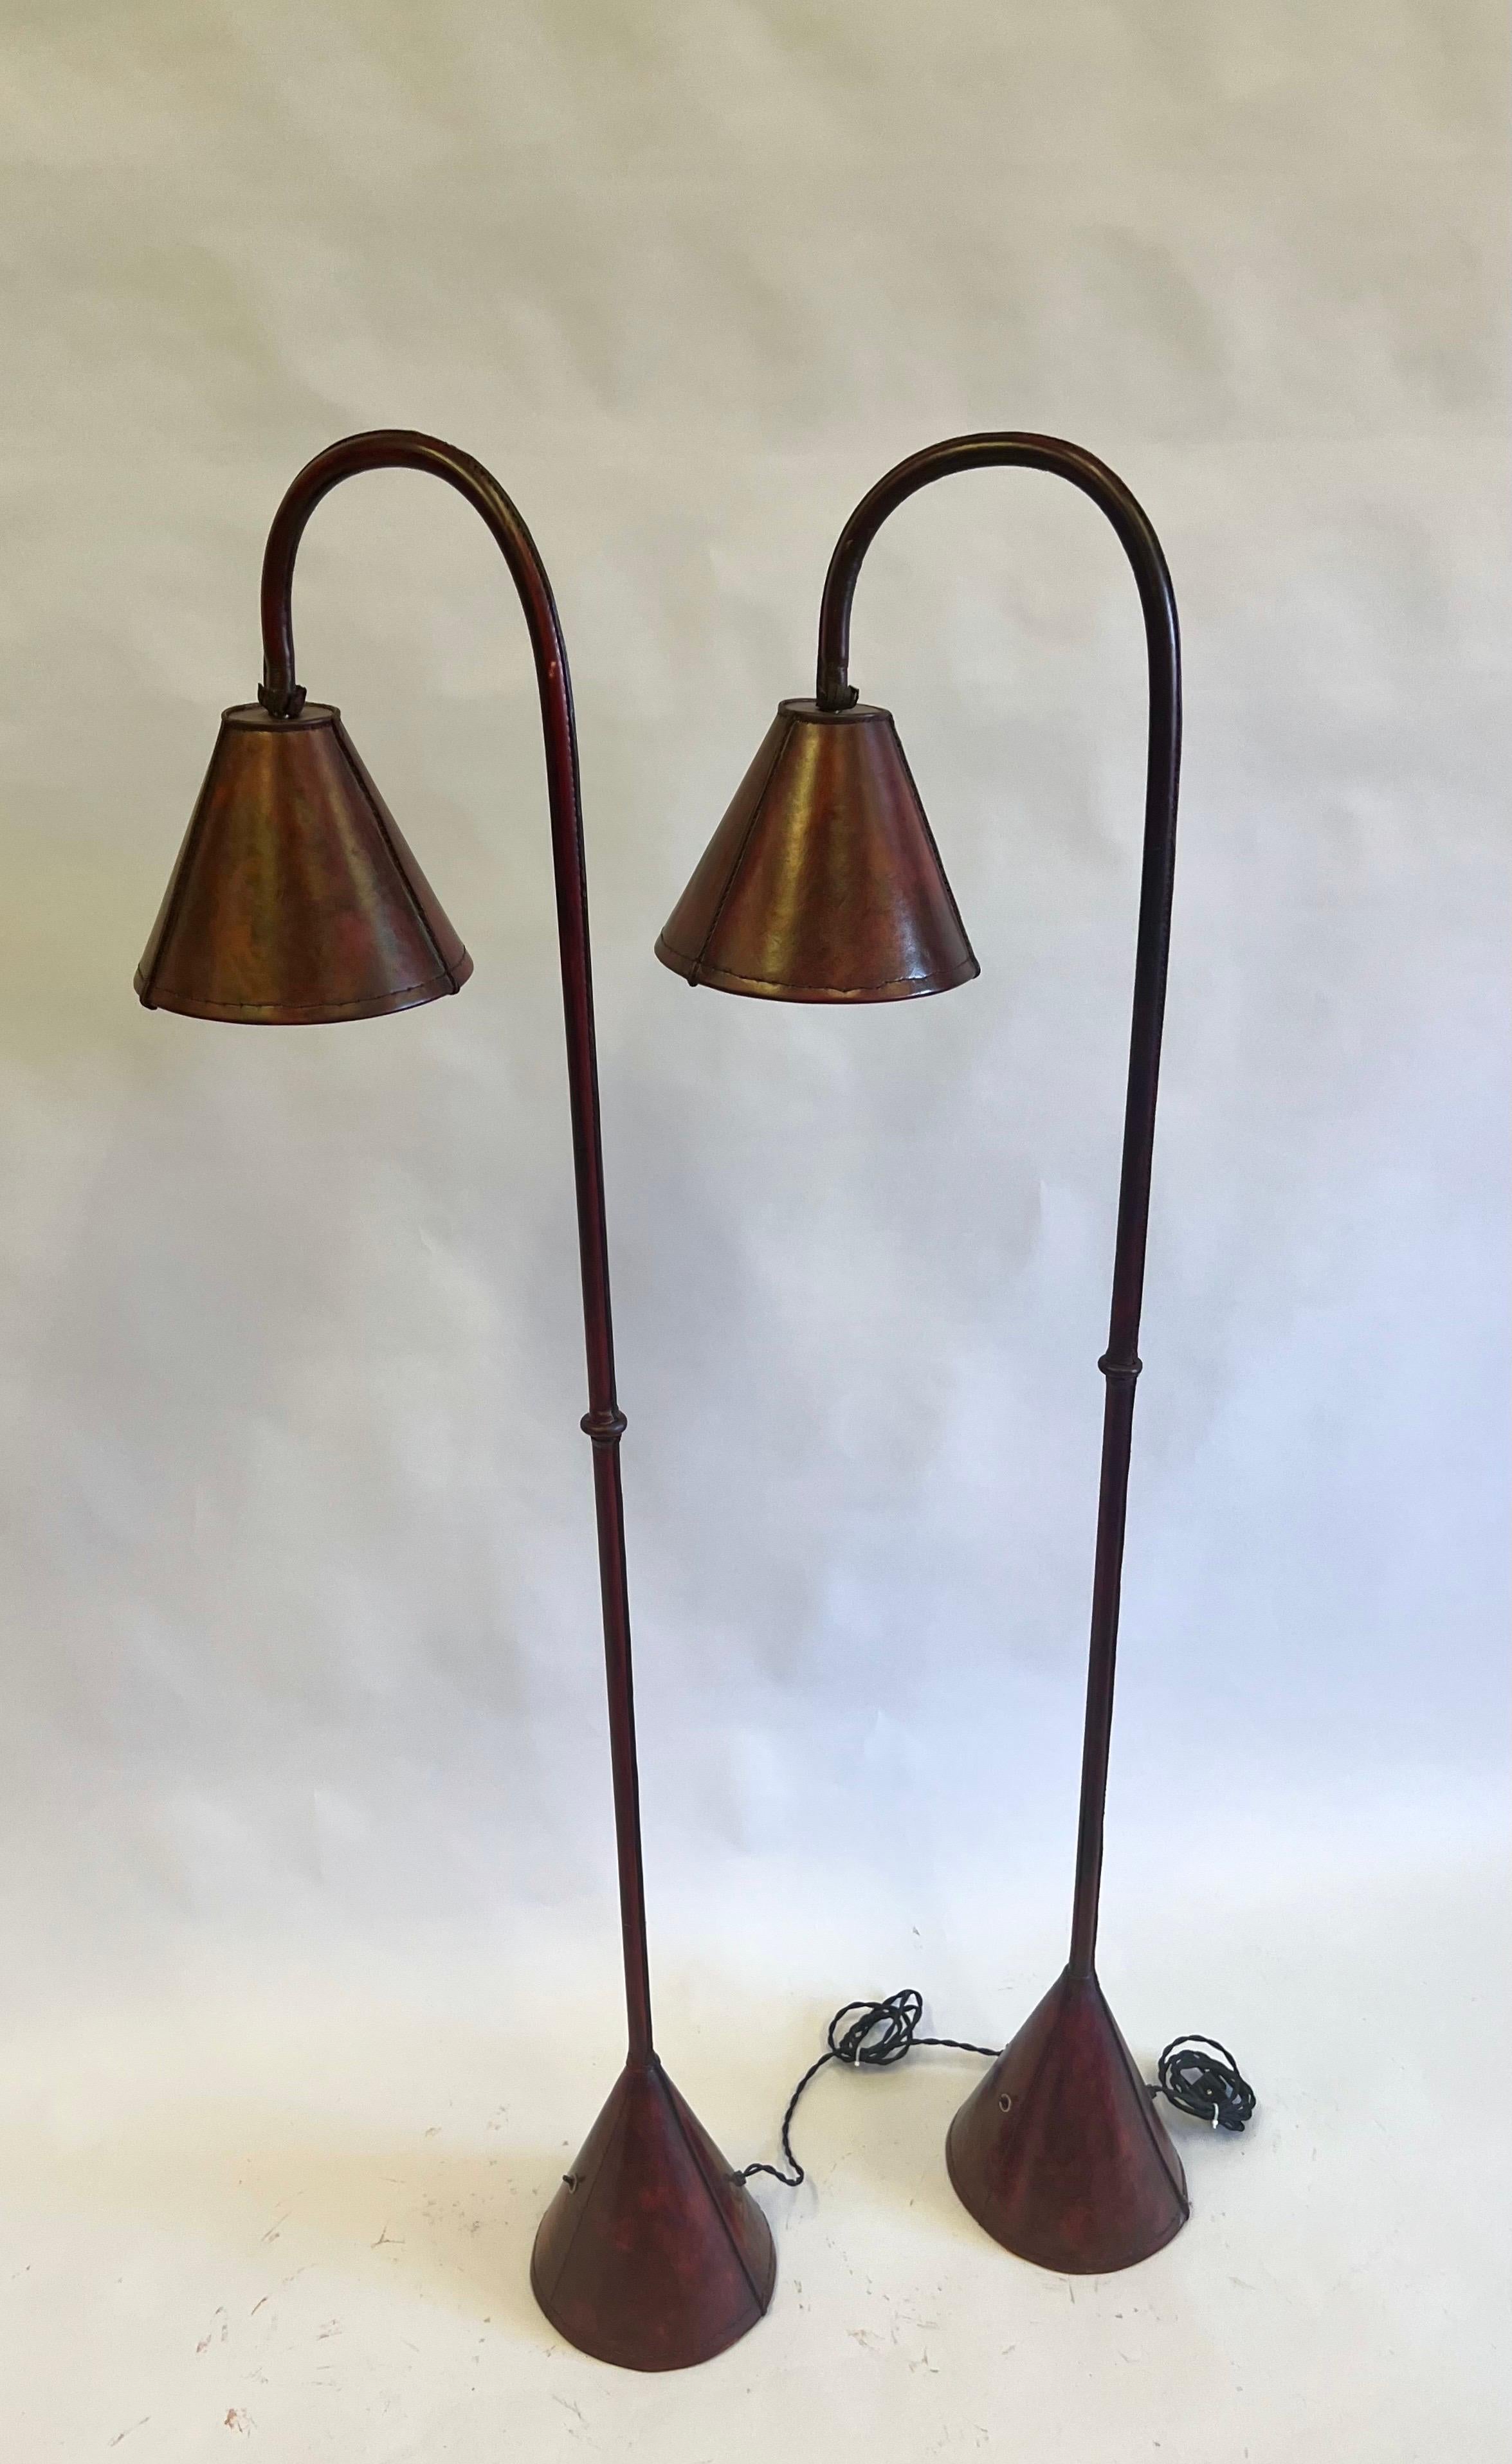 Hand-Crafted Pair, French Mid-Century Burgundy Stitched Leather Floor Lamps by Jacques Adnet